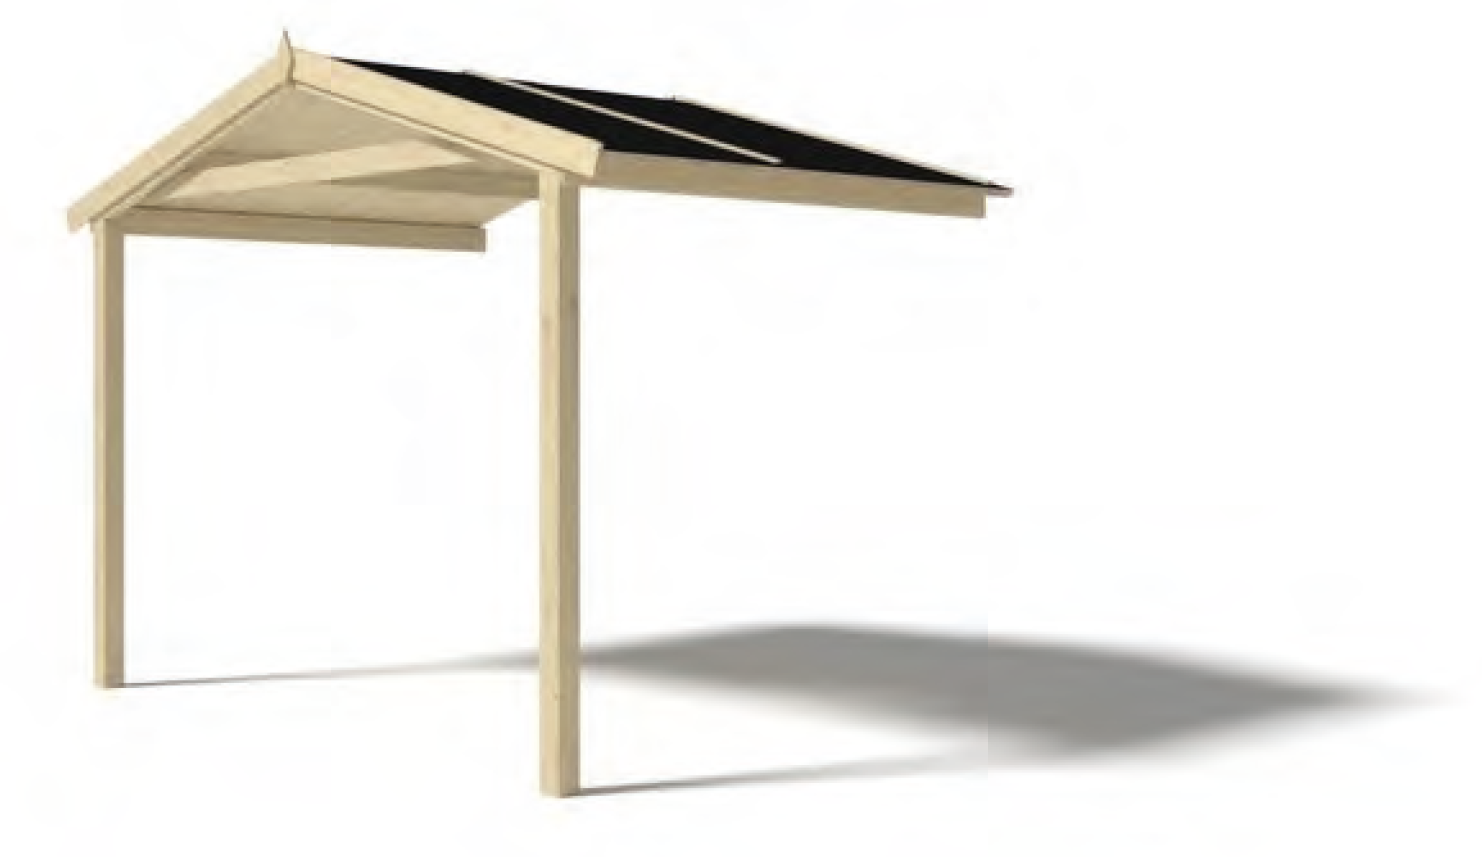 Vienna roof and veranda for shelter in wood 300 x 200 cm